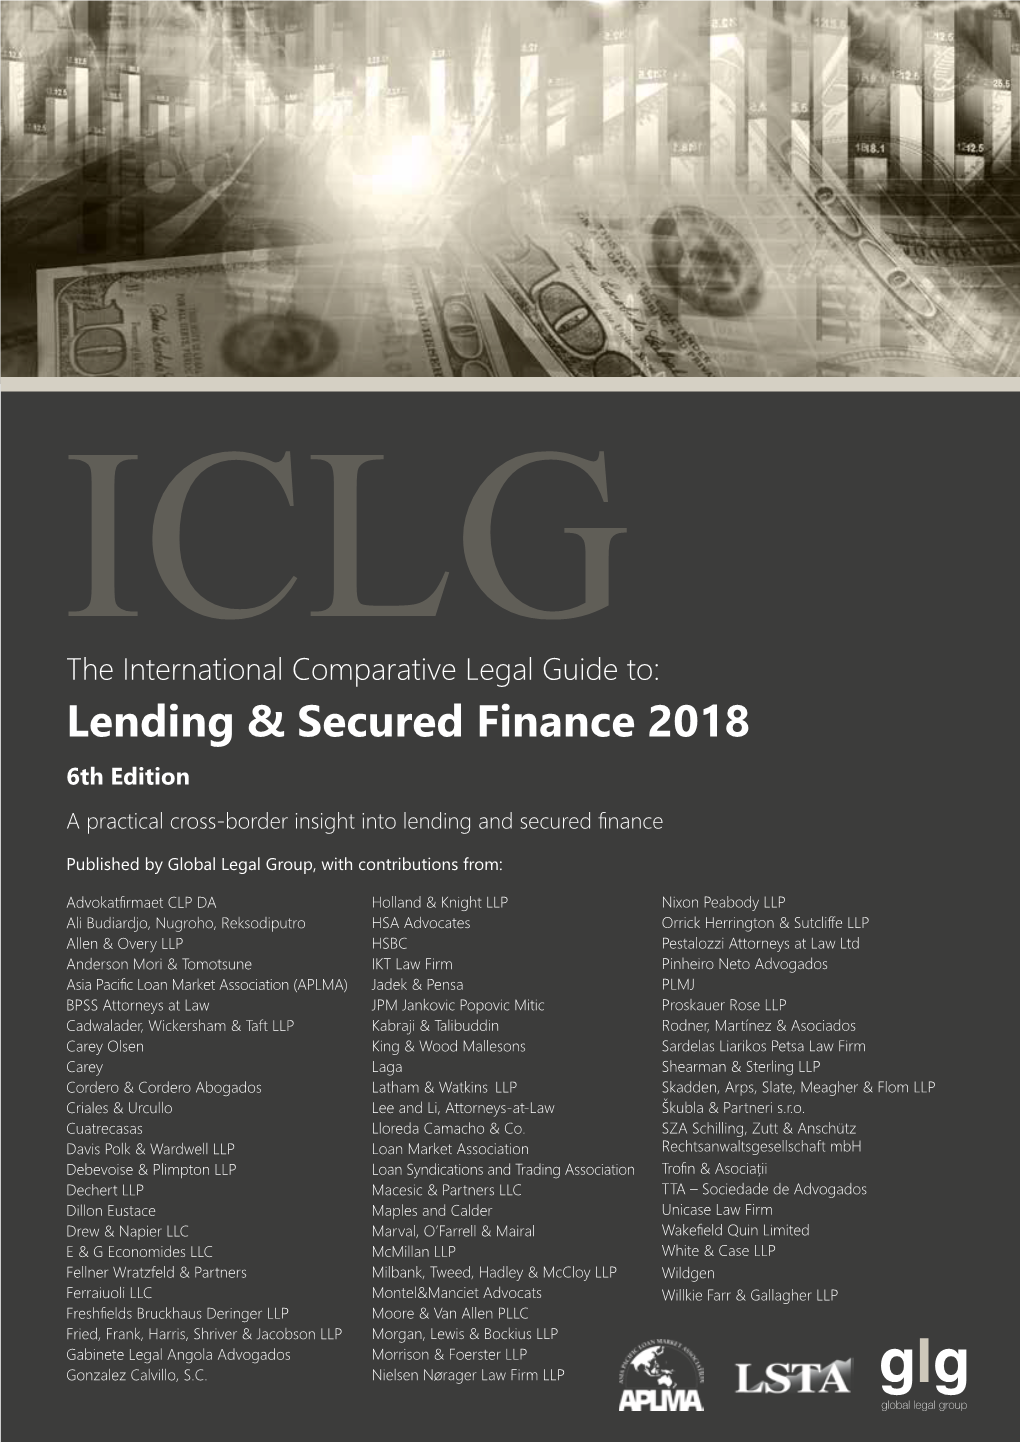 The International Comparative Legal Guide To: Lending & Secured Finance 2018 6Th Edition a Practical Cross-Border Insight Into Lending and Secured Finance